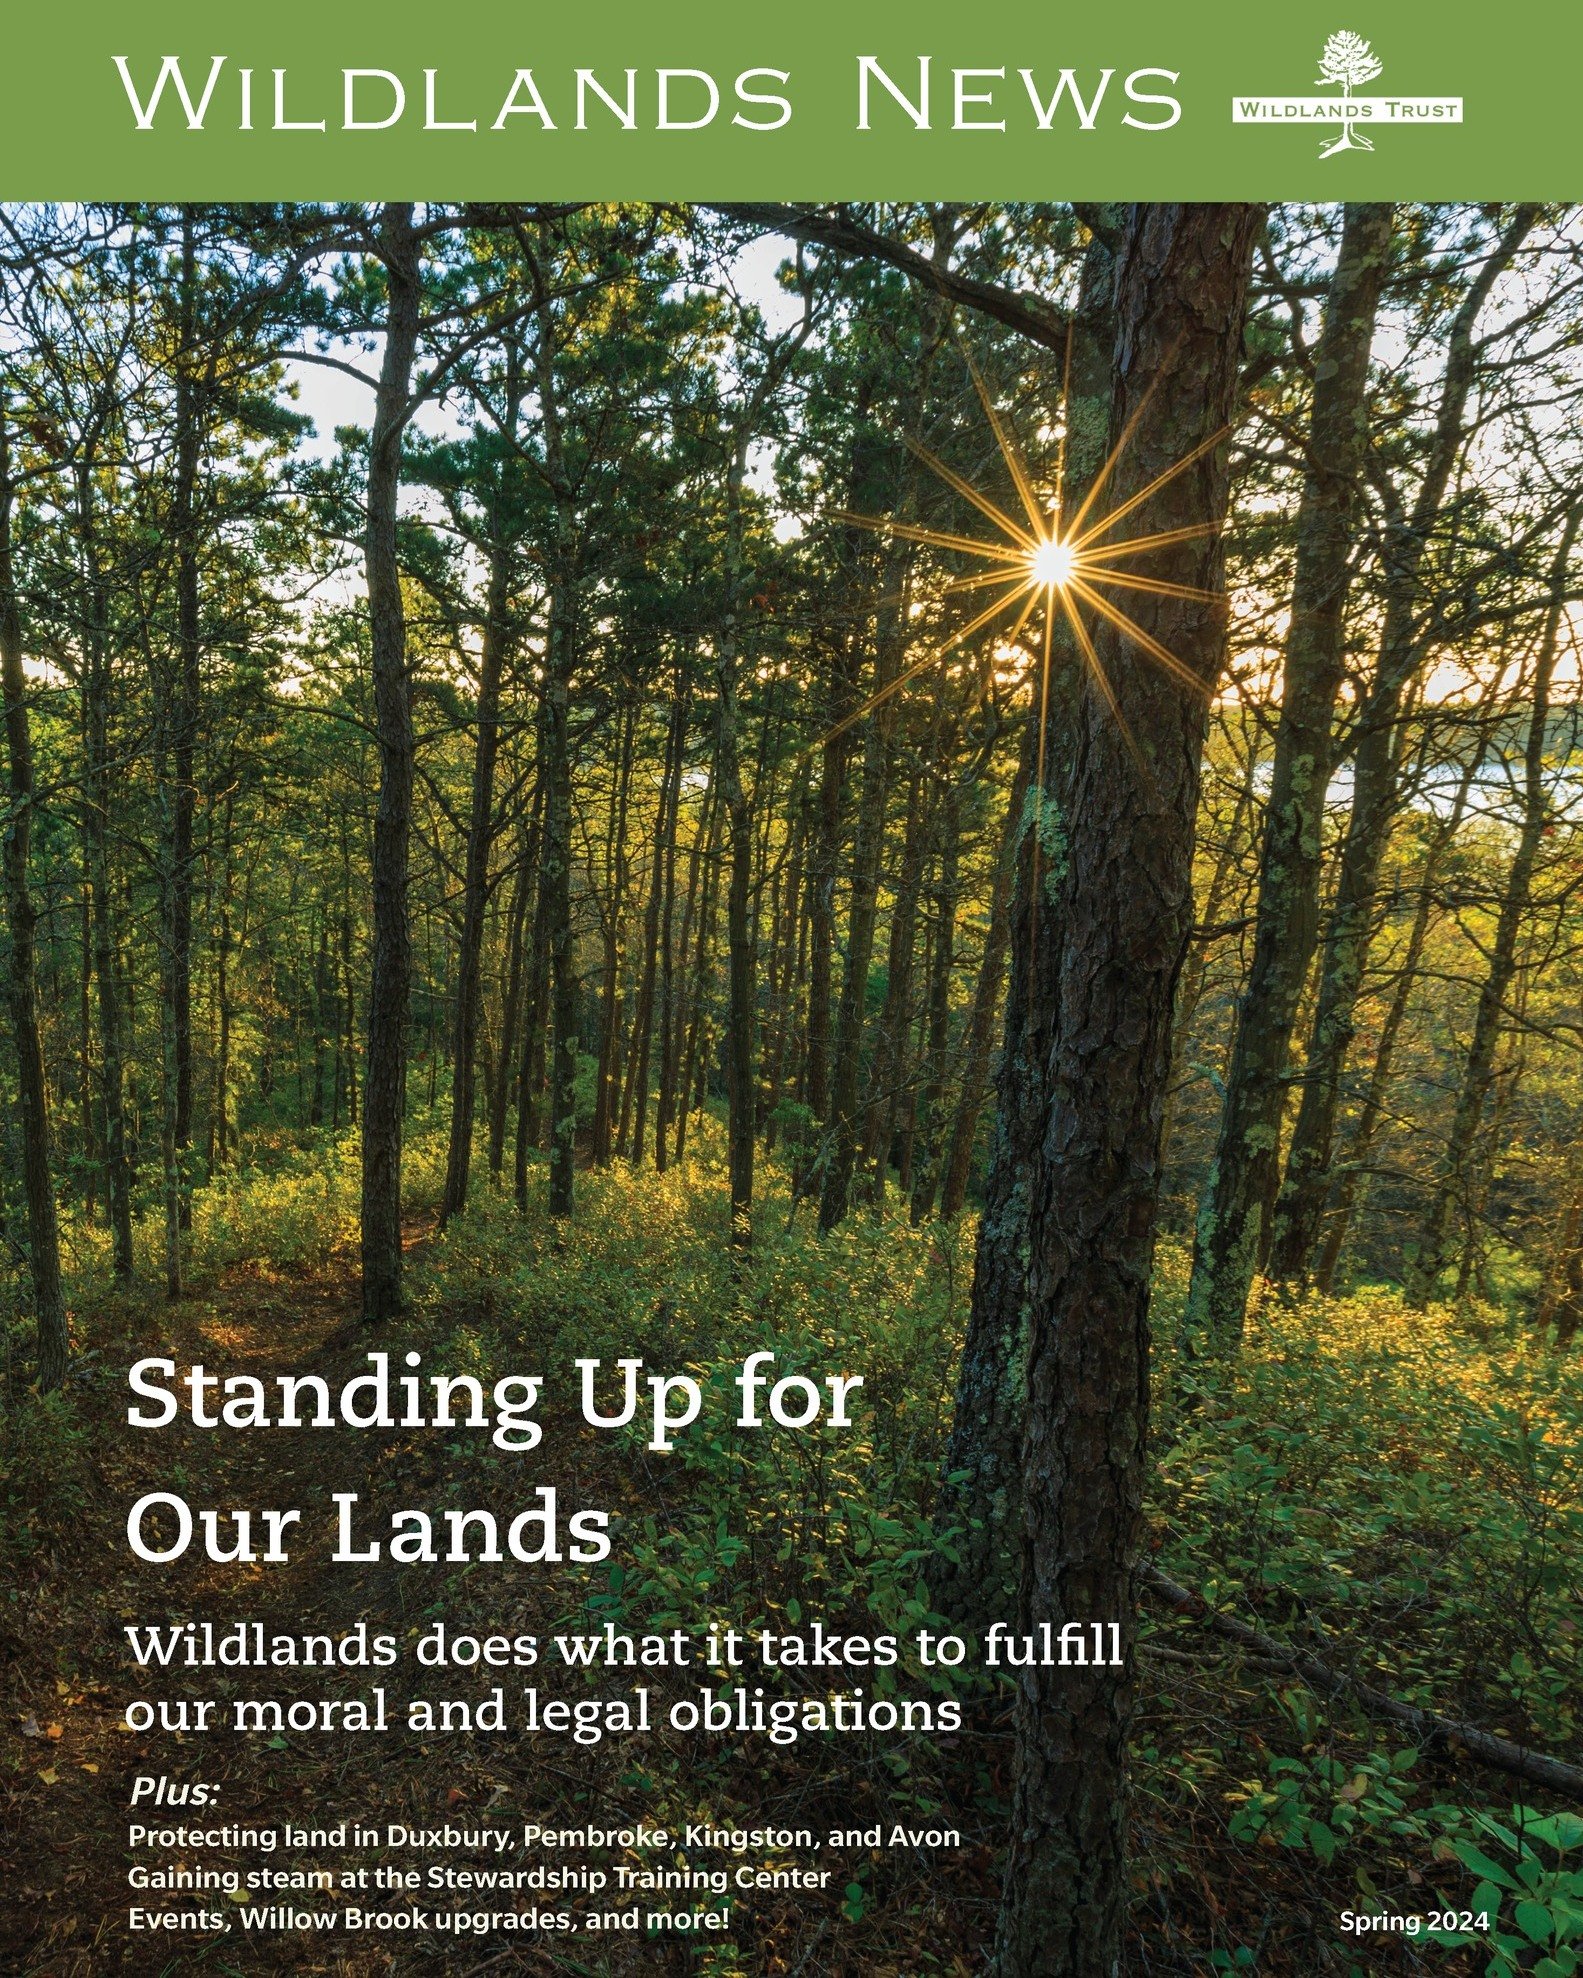 New Year, New News 🌲📰

Check your mailboxes! Our expanded and redesigned biannual newsletter, Wildlands News, was sent to members on Monday.

Featured: How Wildlands stands up for our lands, and for the communities we serve. Plus: newly protected l